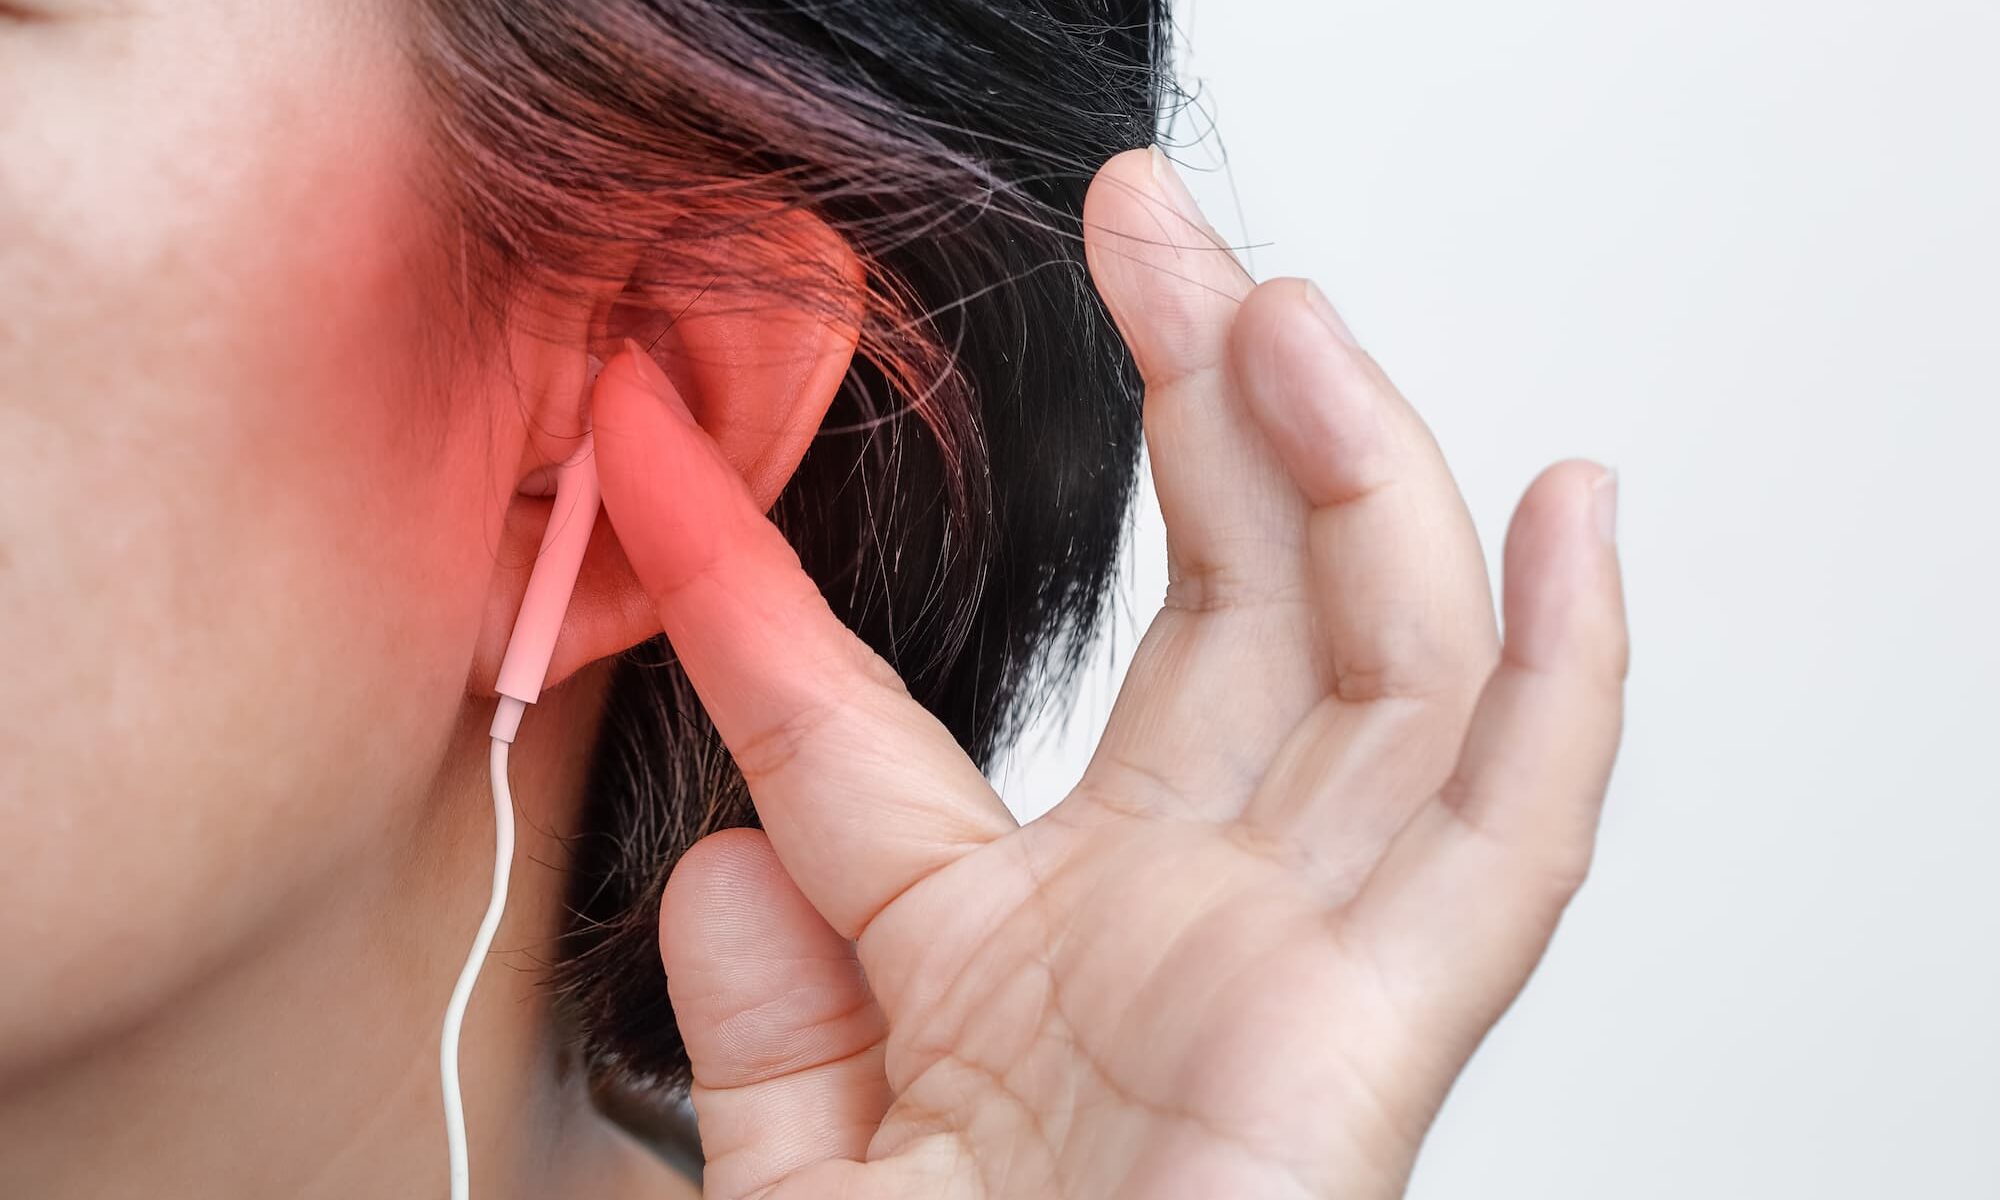 Earphones May Carry Risk of Hearing Loss. Learn more at Memorial Hearing.